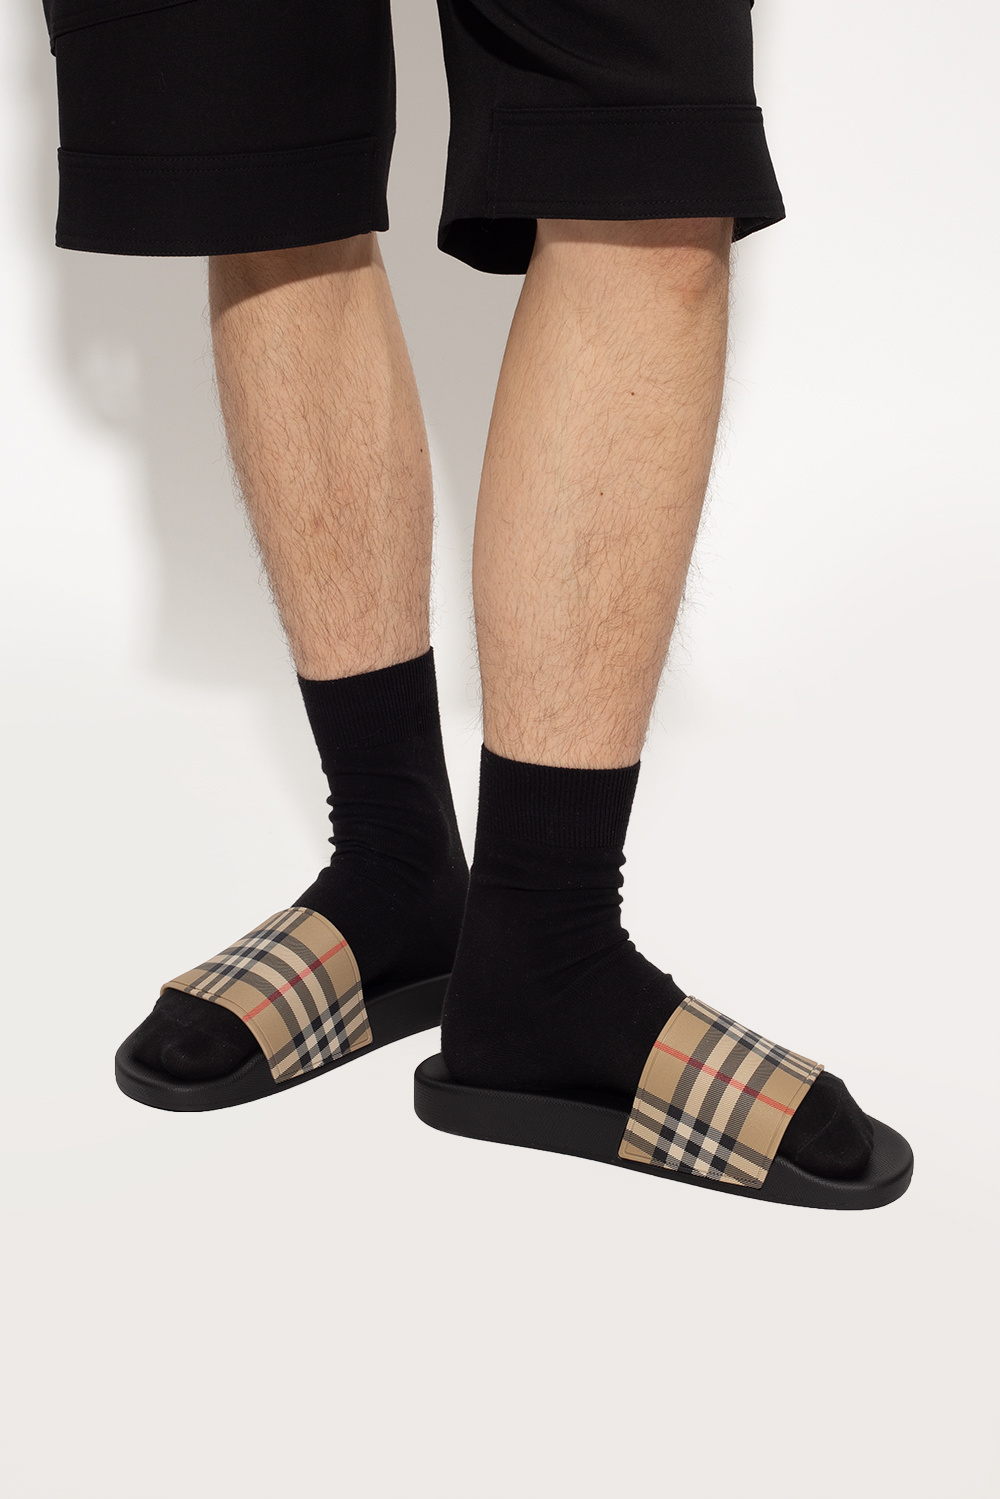 burberry Archive ‘Furley’ slides